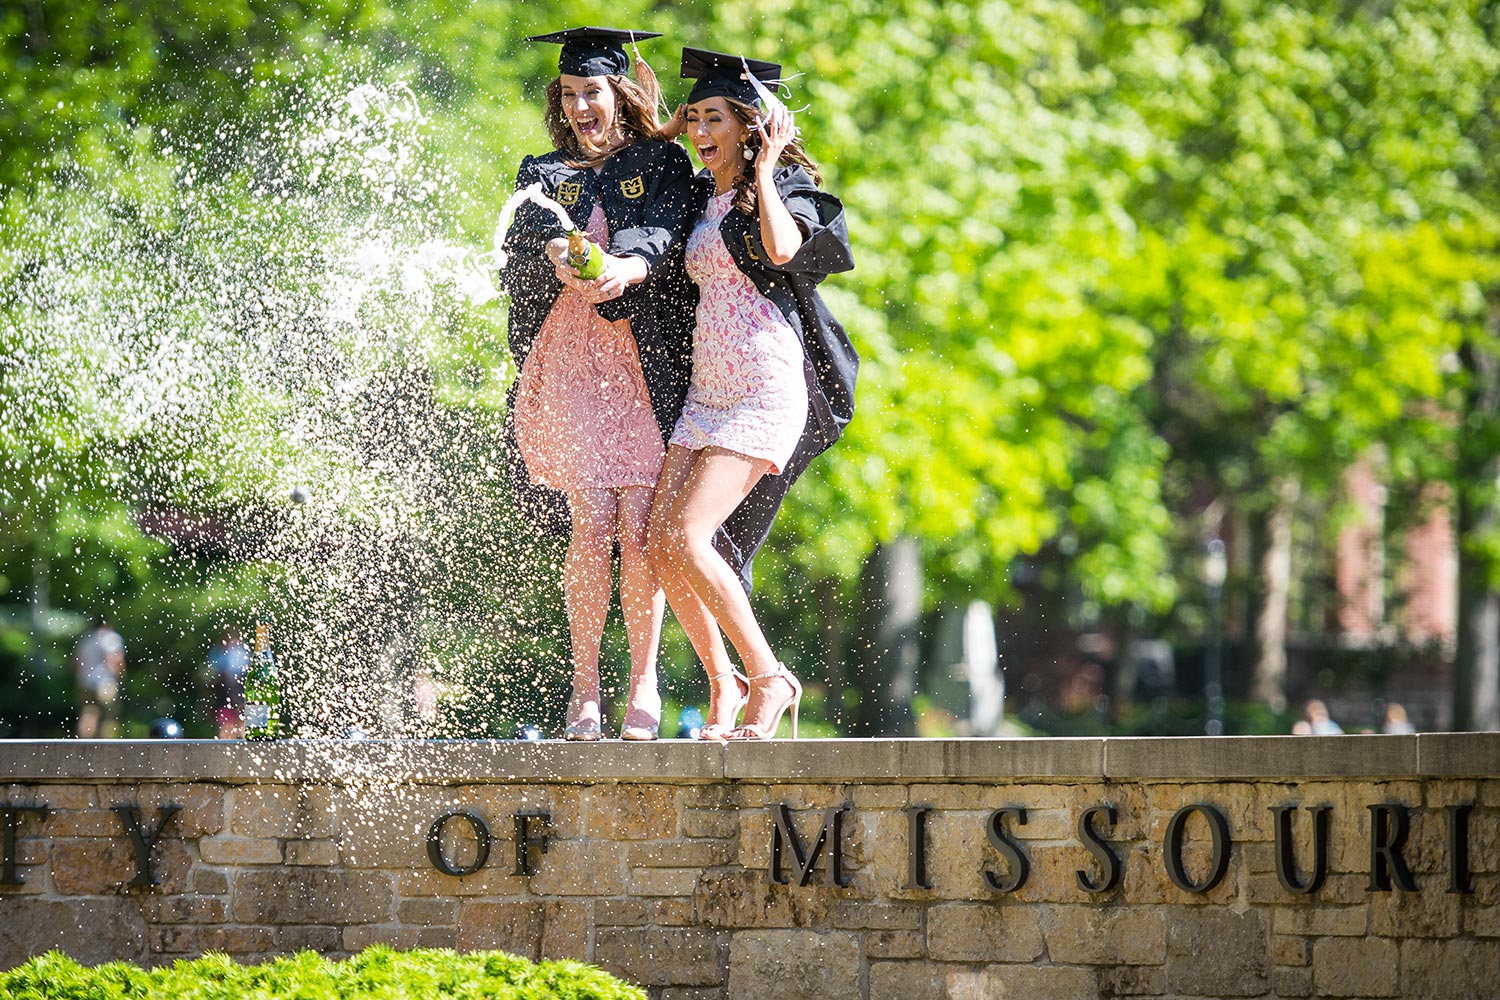 Marketing major Vanessa Salomon and mass media communication major Holly Sias celebrate their pending graduation with a bottle of sparkling bubbly.